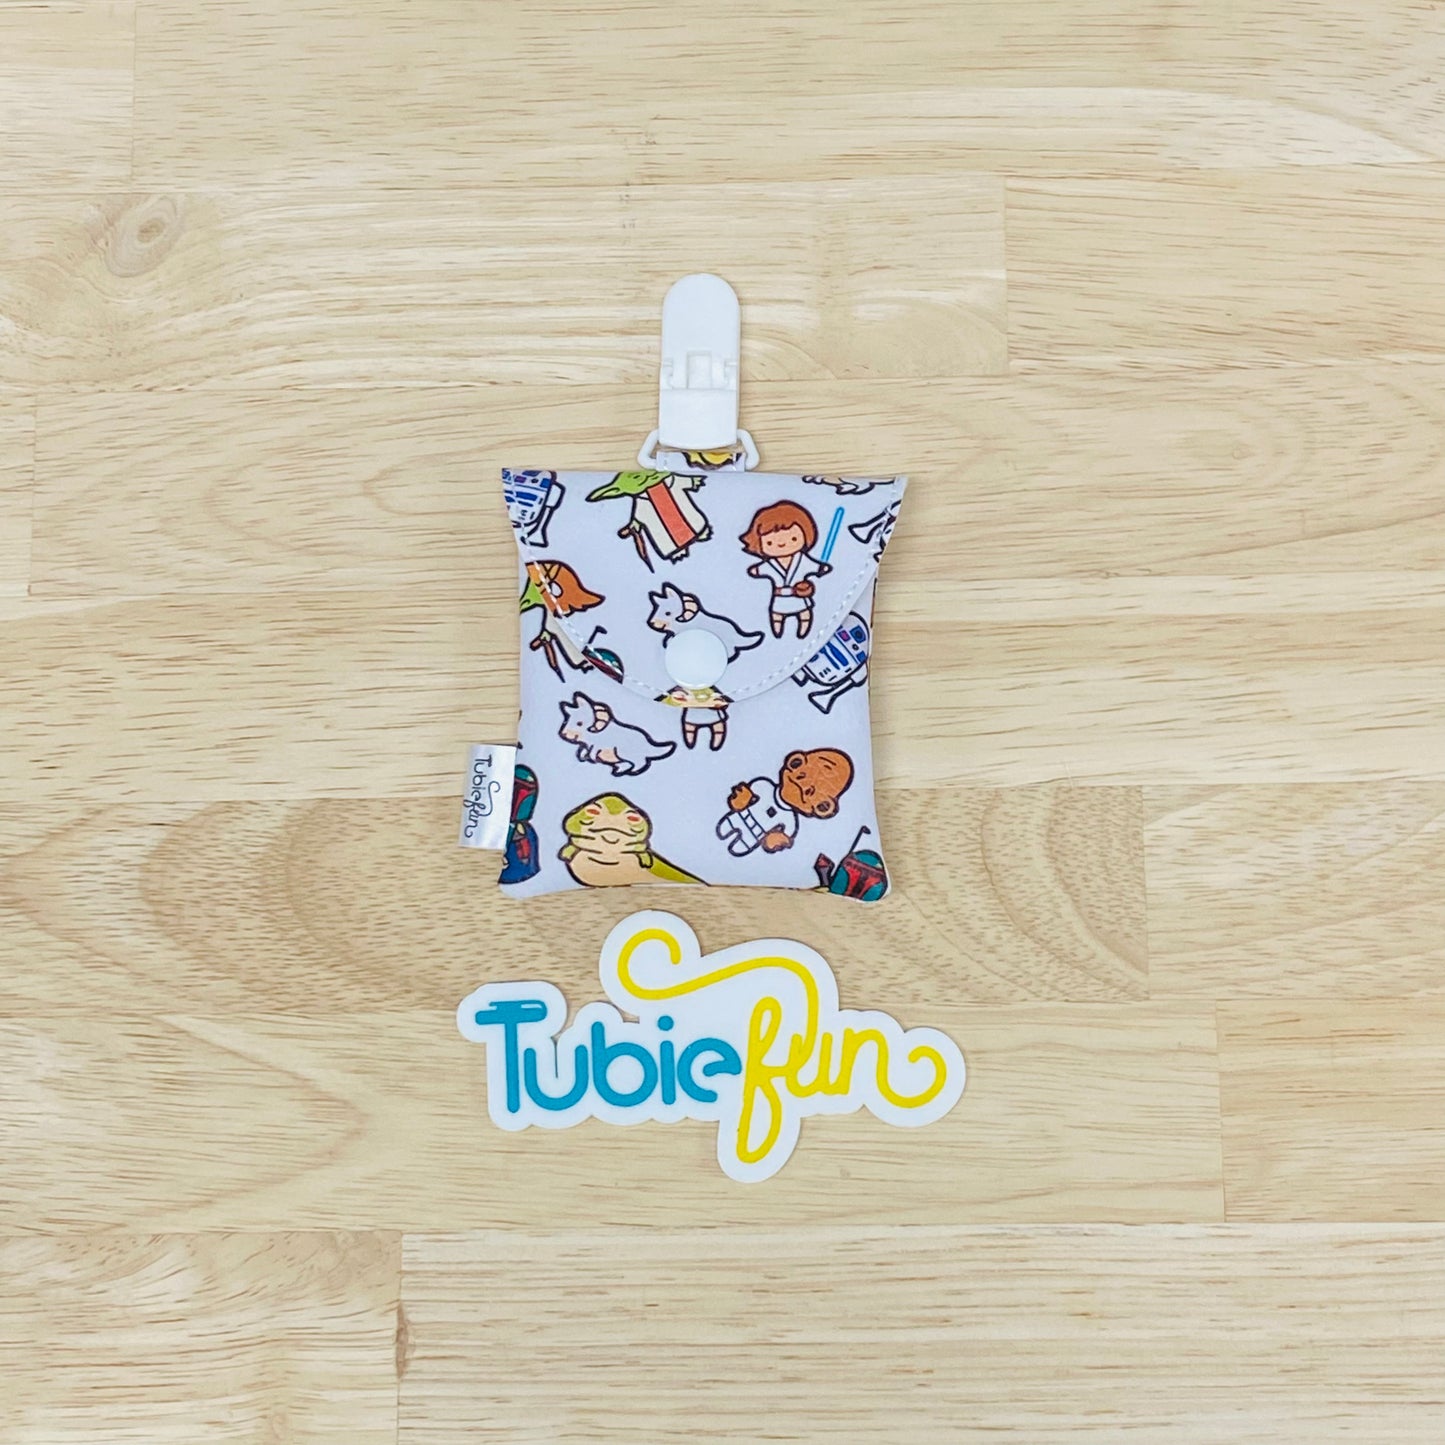 Tubing Pouch - Star Characters on White